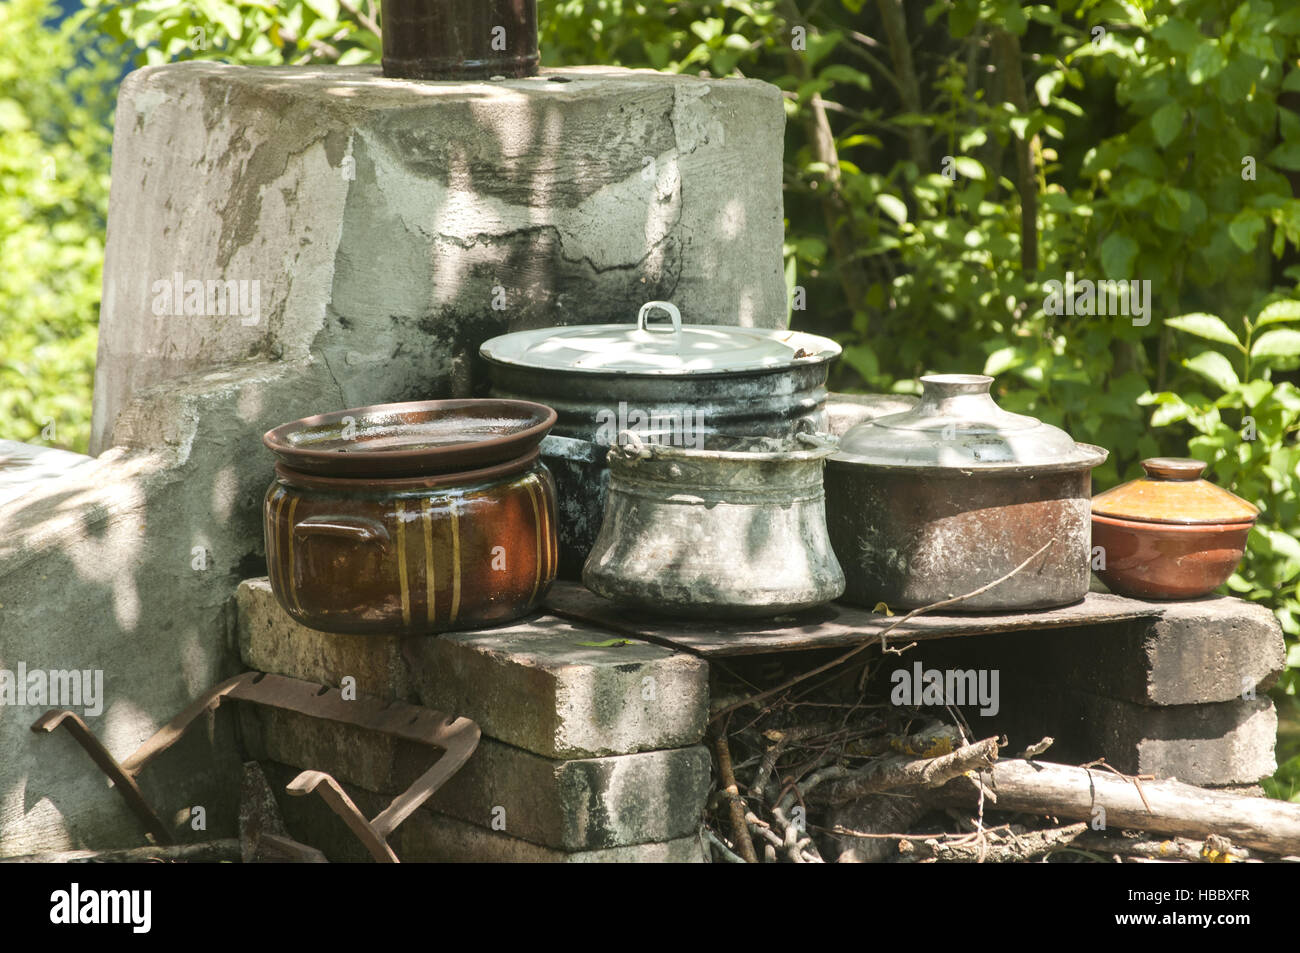 Outdoor fireplace with pots Stock Photo